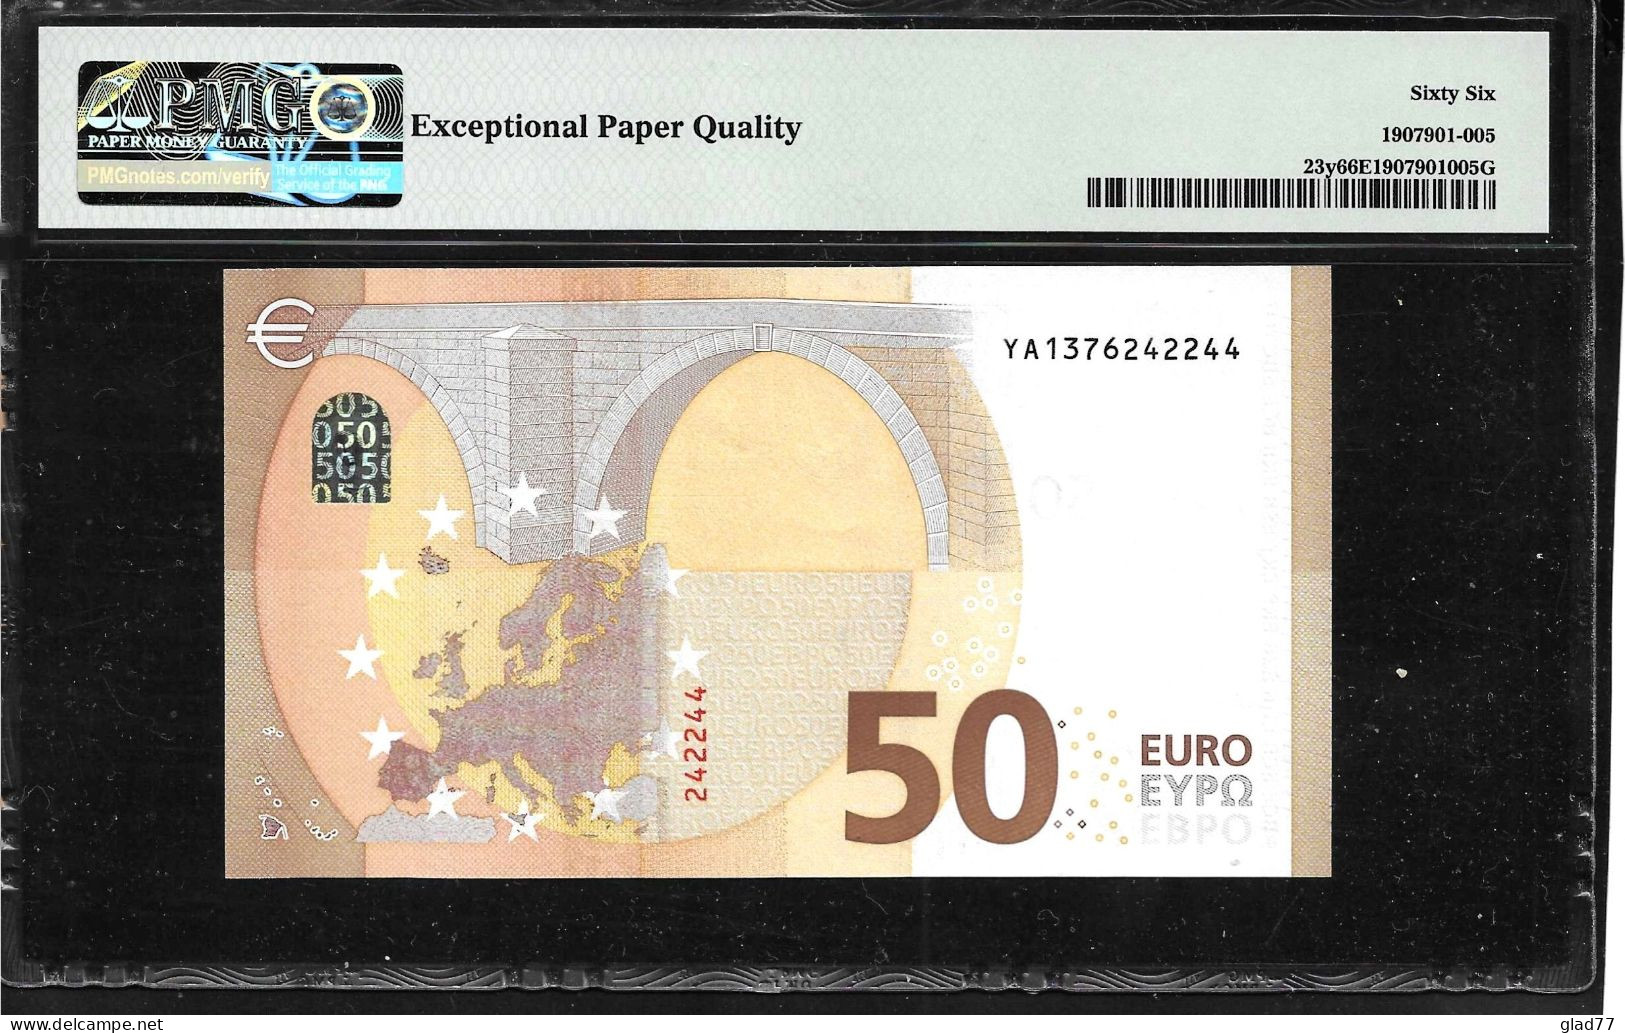 Greece  "Y" 50  EURO  DRAGHI Signature! PMG66 GEM UNC Exceptional Paper Quality  Printer Y003C2!  Rare Bank Note! - 50 Euro